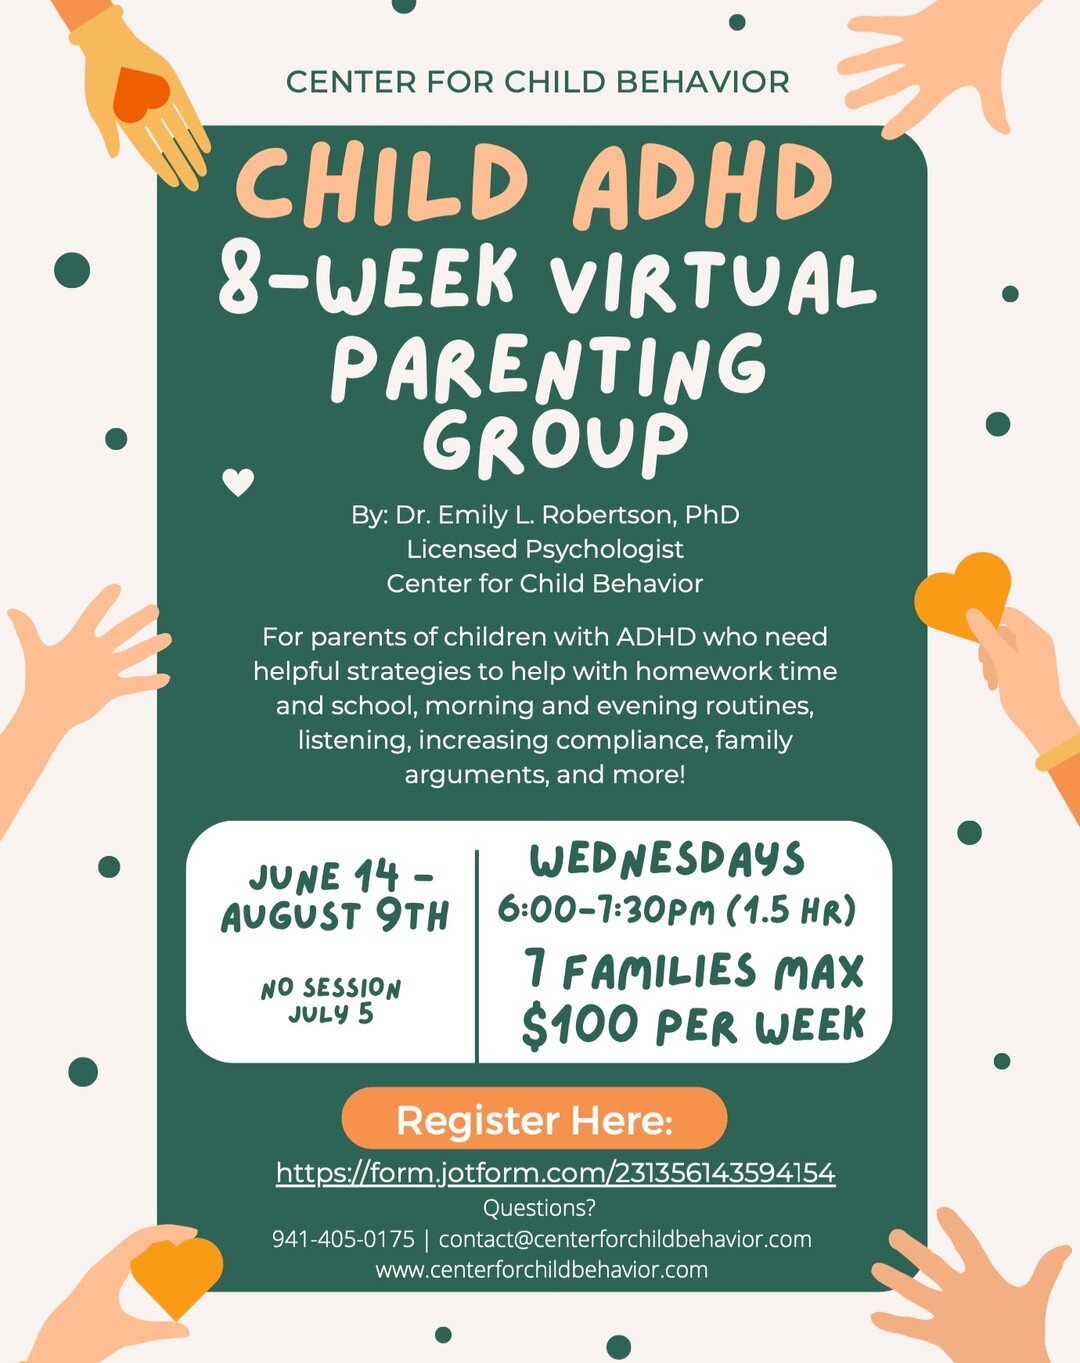 Florida Families: Join us for an 8-week Child ADHD Parenting Group held virtually on Wednesdays from 6-7:30PM starting June 14th! Receive research-backed therapy for your child with ADHD, routine &amp; HW challenges, defiance, &amp; more!

REGISTER (